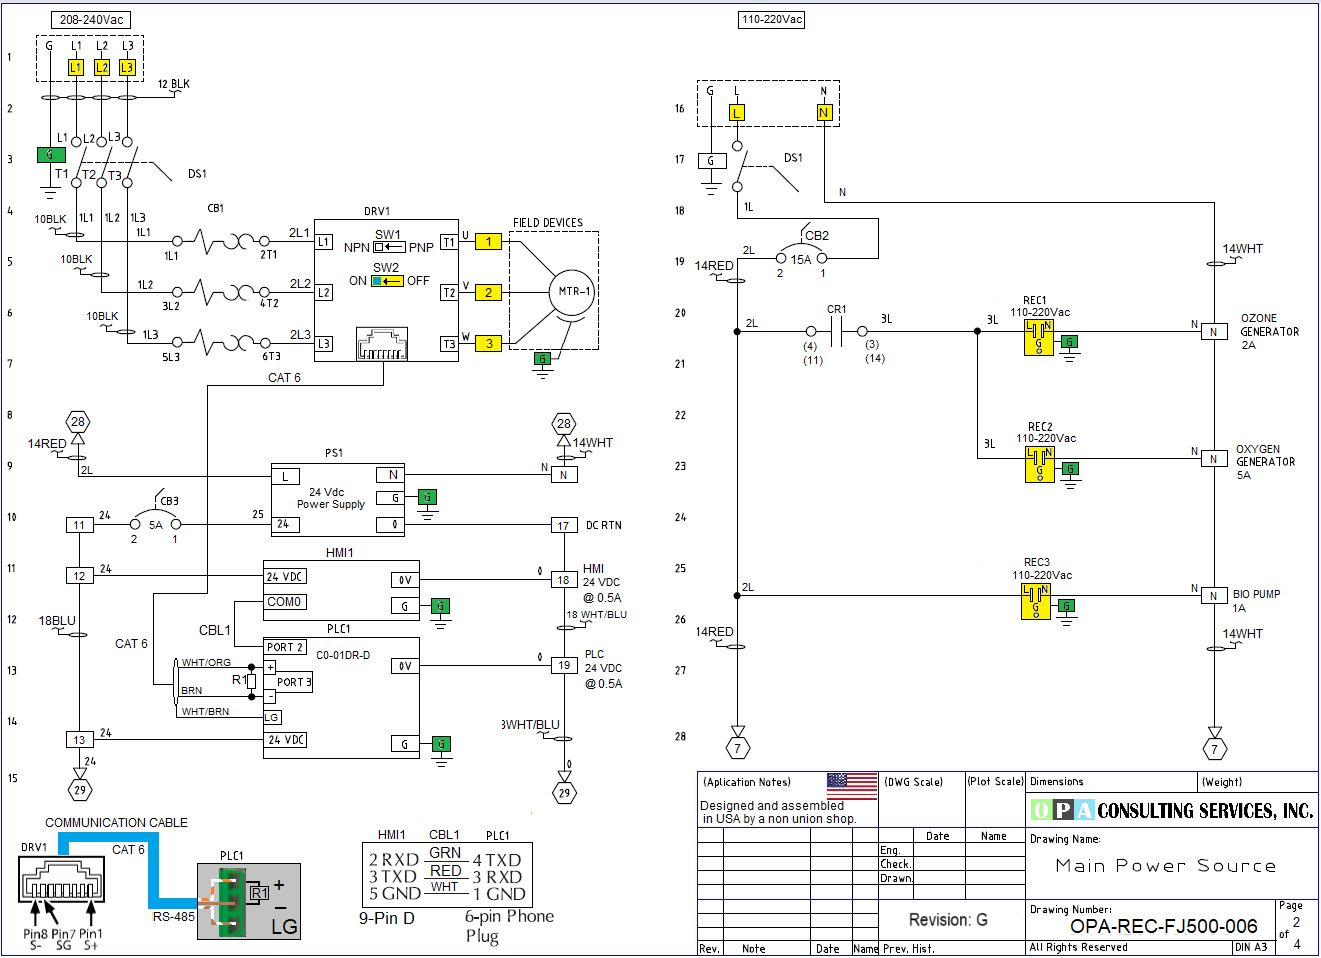 FJ 500 Controller Drawing ... Free to Download